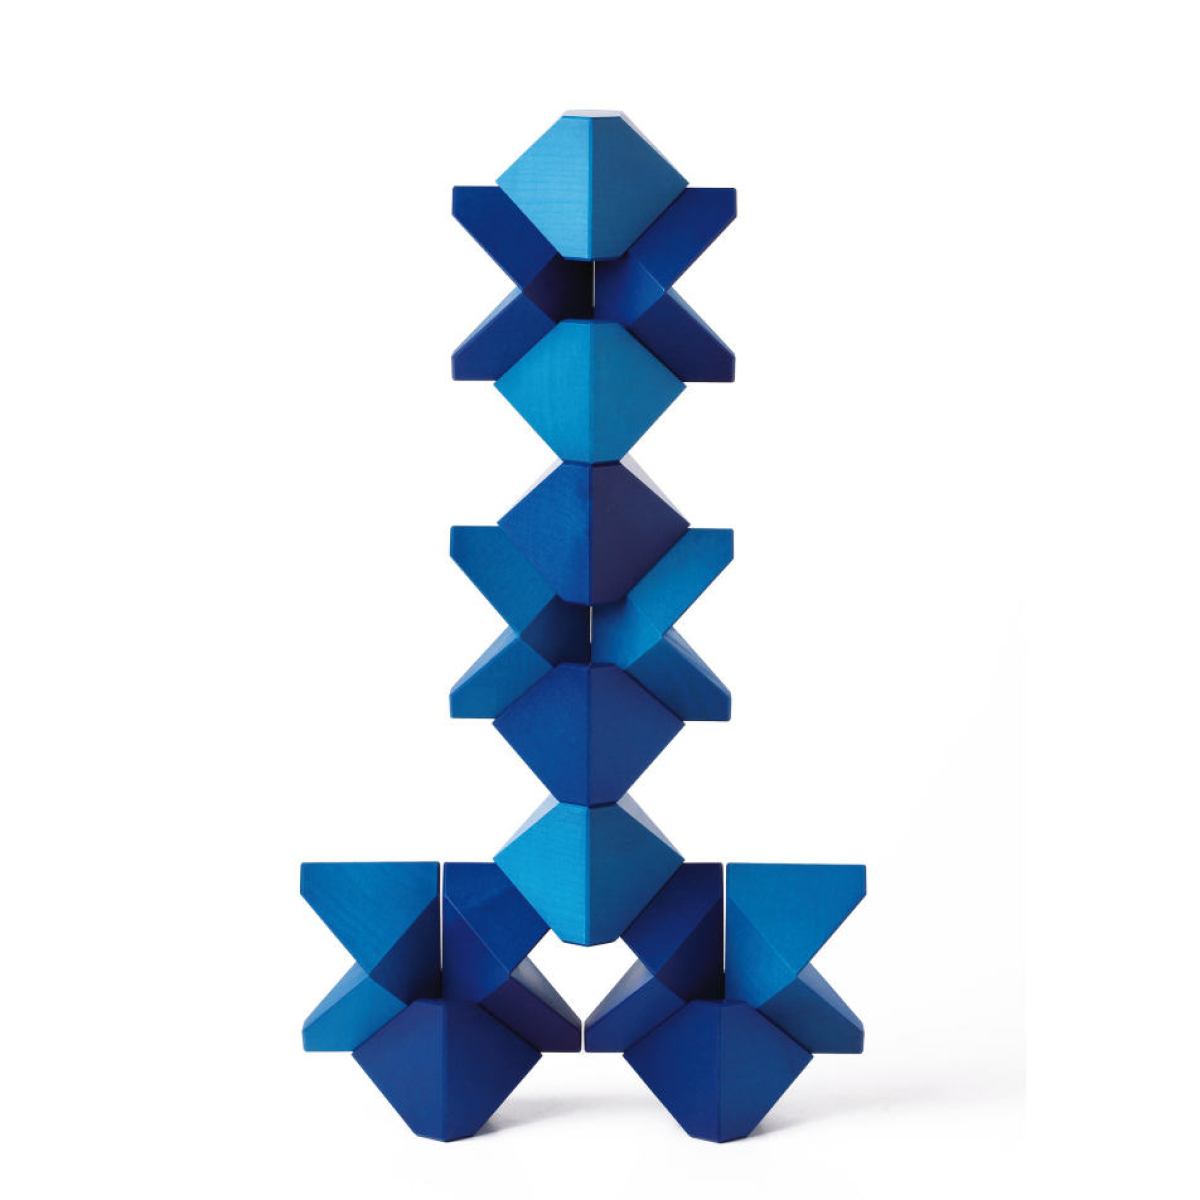 Tawa (Blue) – Original Construction Game by Naef, made of Wood